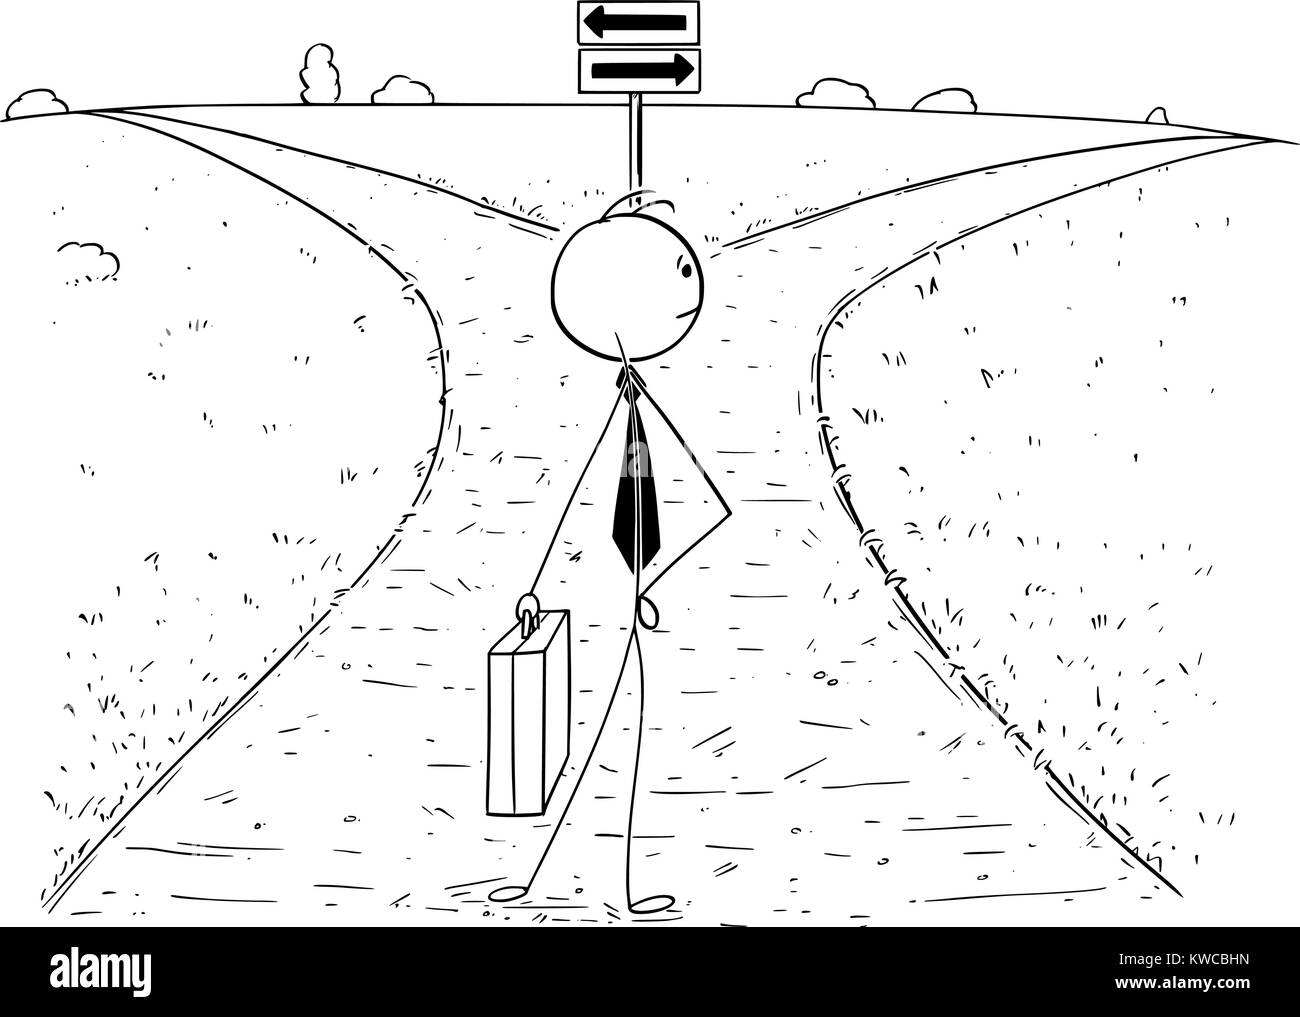 Cartoon stick man drawing illustration of businessman standing on the crossroad and making choice or decision. Concept of business career opportunitie Stock Vector